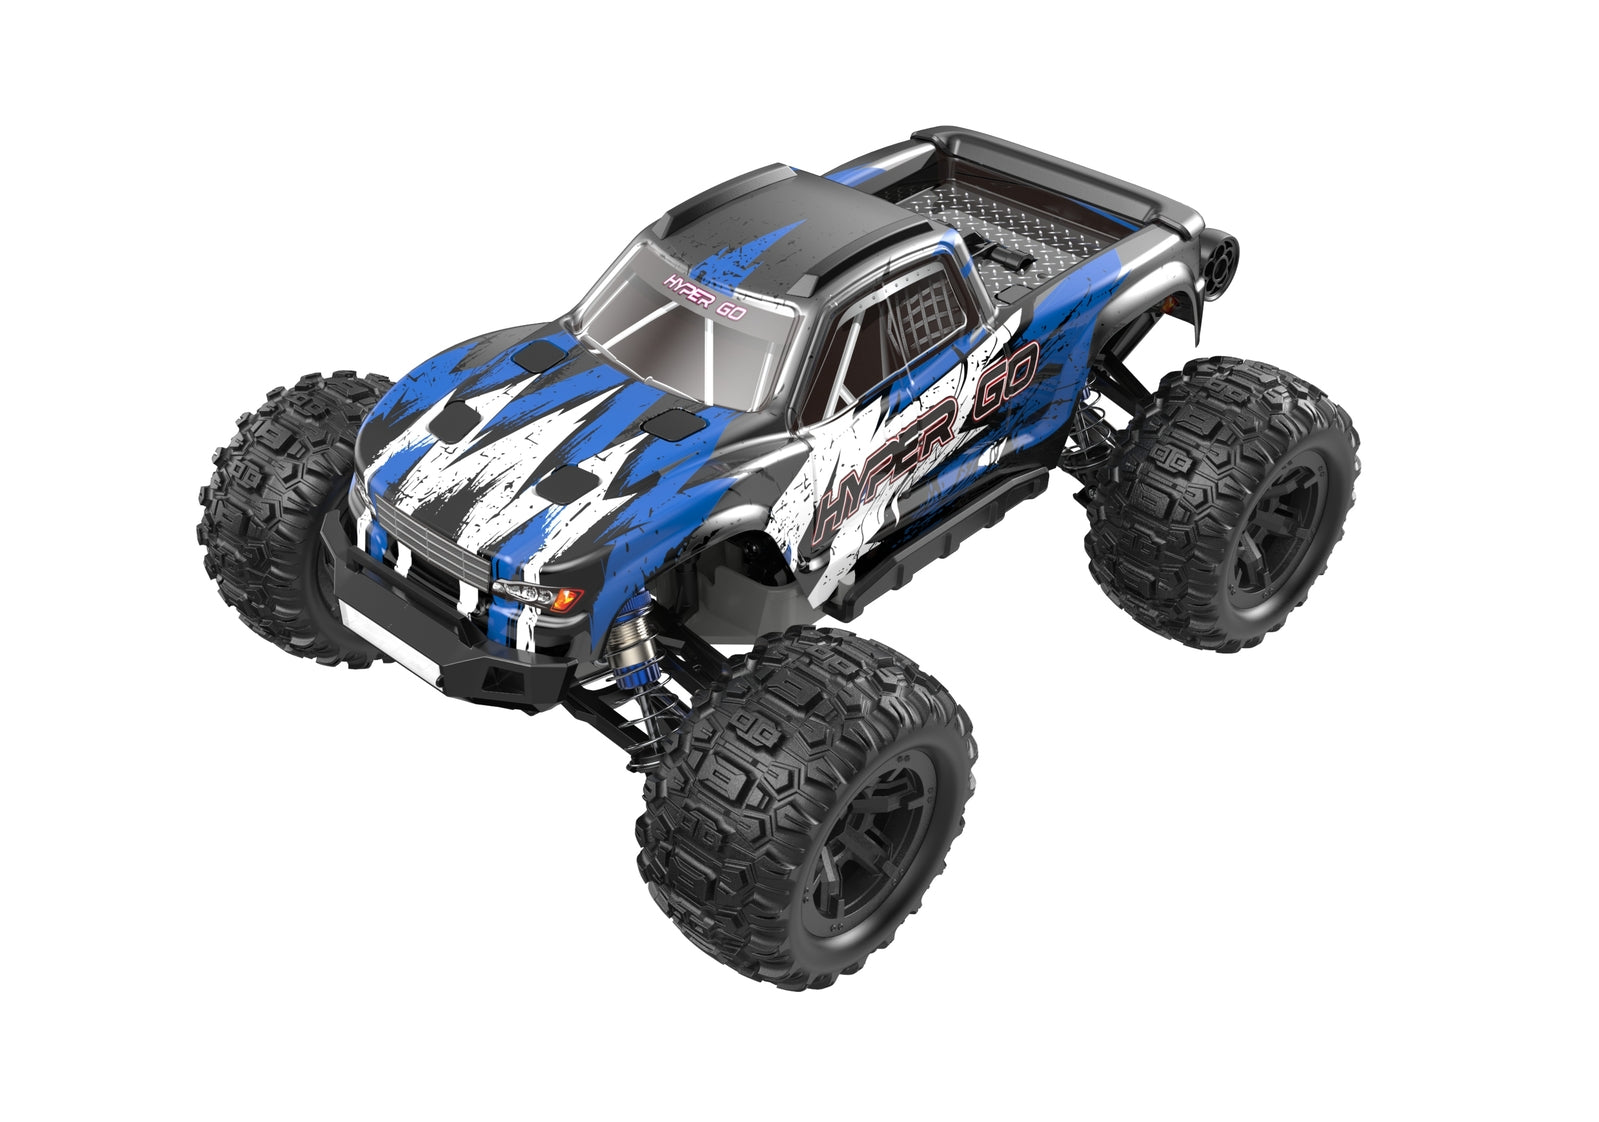 MJX 1/16 RTR Brushed RC Monster Truck with GPS (Blue) [H16H-1] - [Sunshine-Coast] - MJX - [RC-Car] - [Scale-Model]